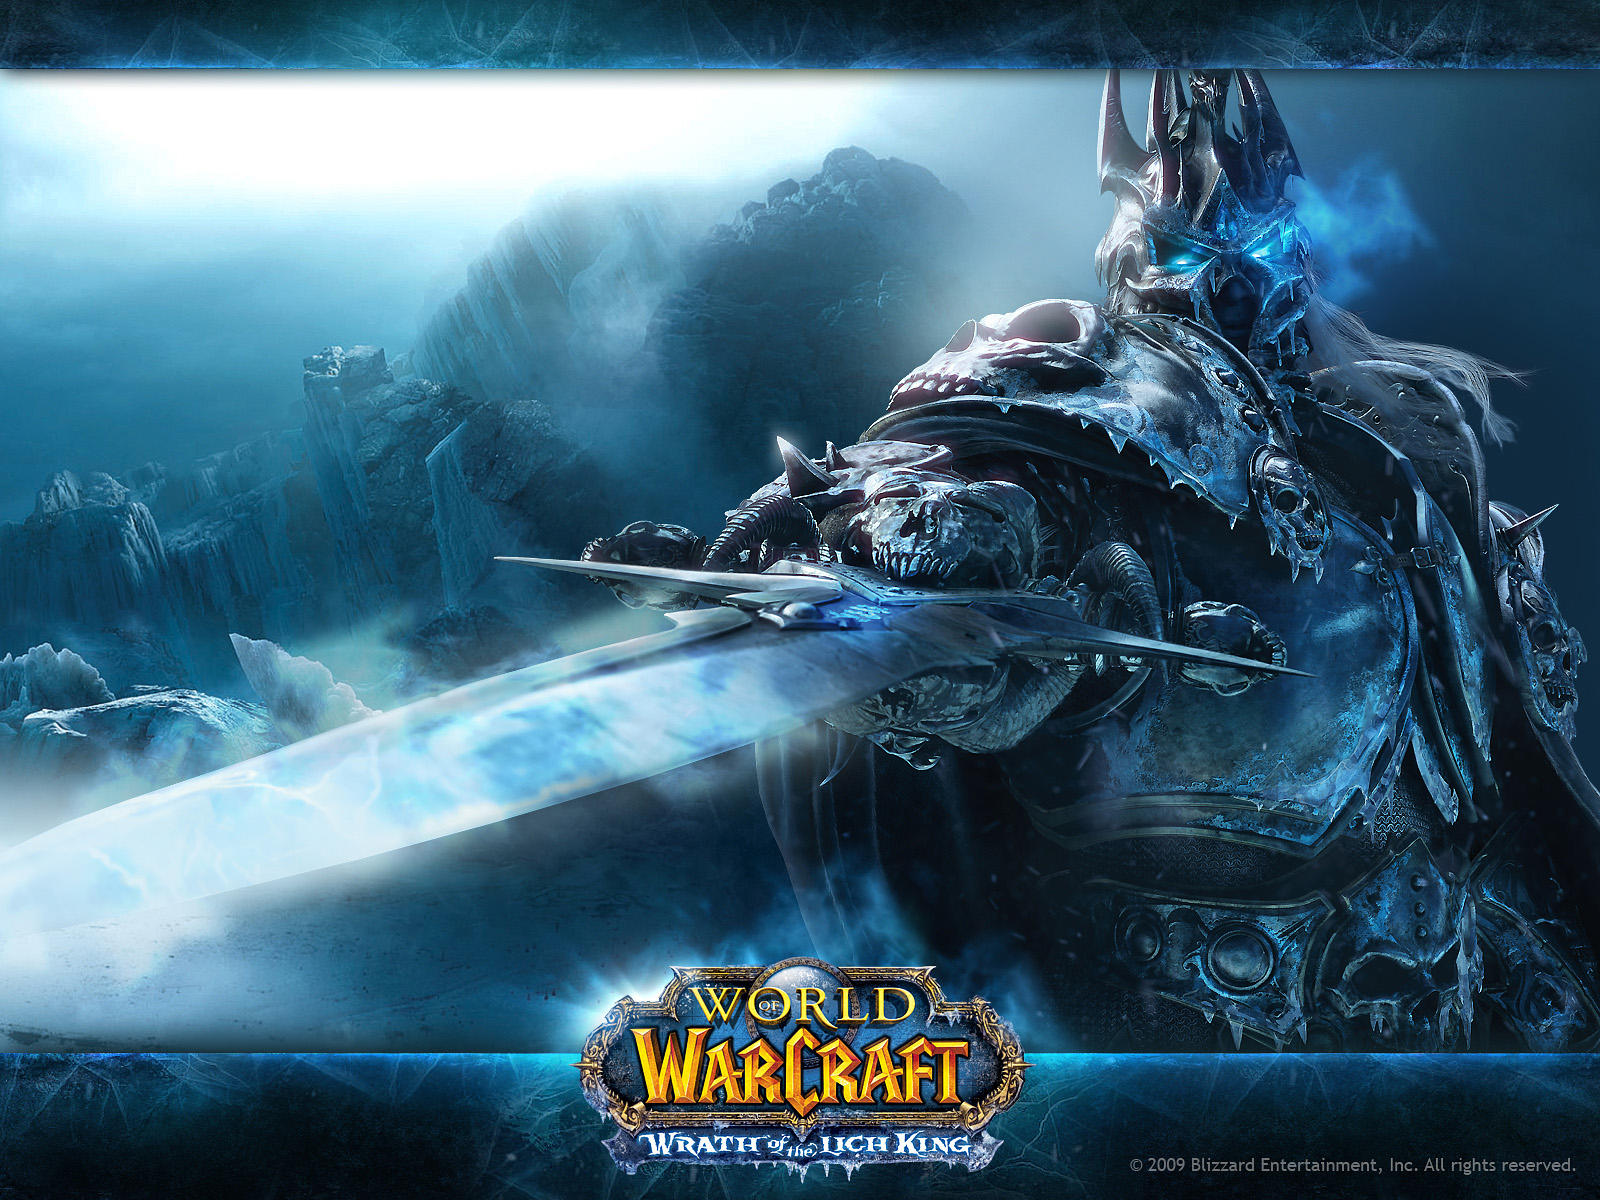 Blizzard EntertainmentWorld of Warcraft Wrath of the Lich King